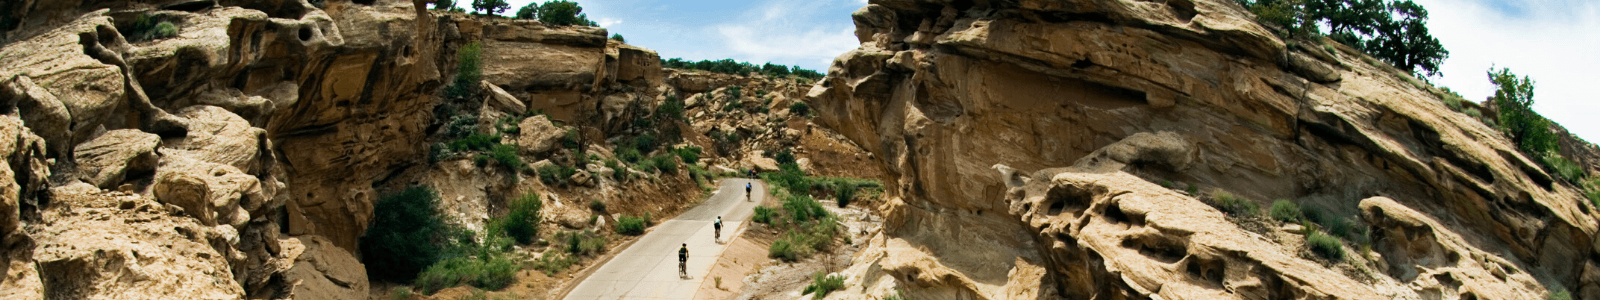 cyclists riding on a paved road through a rock wall pass